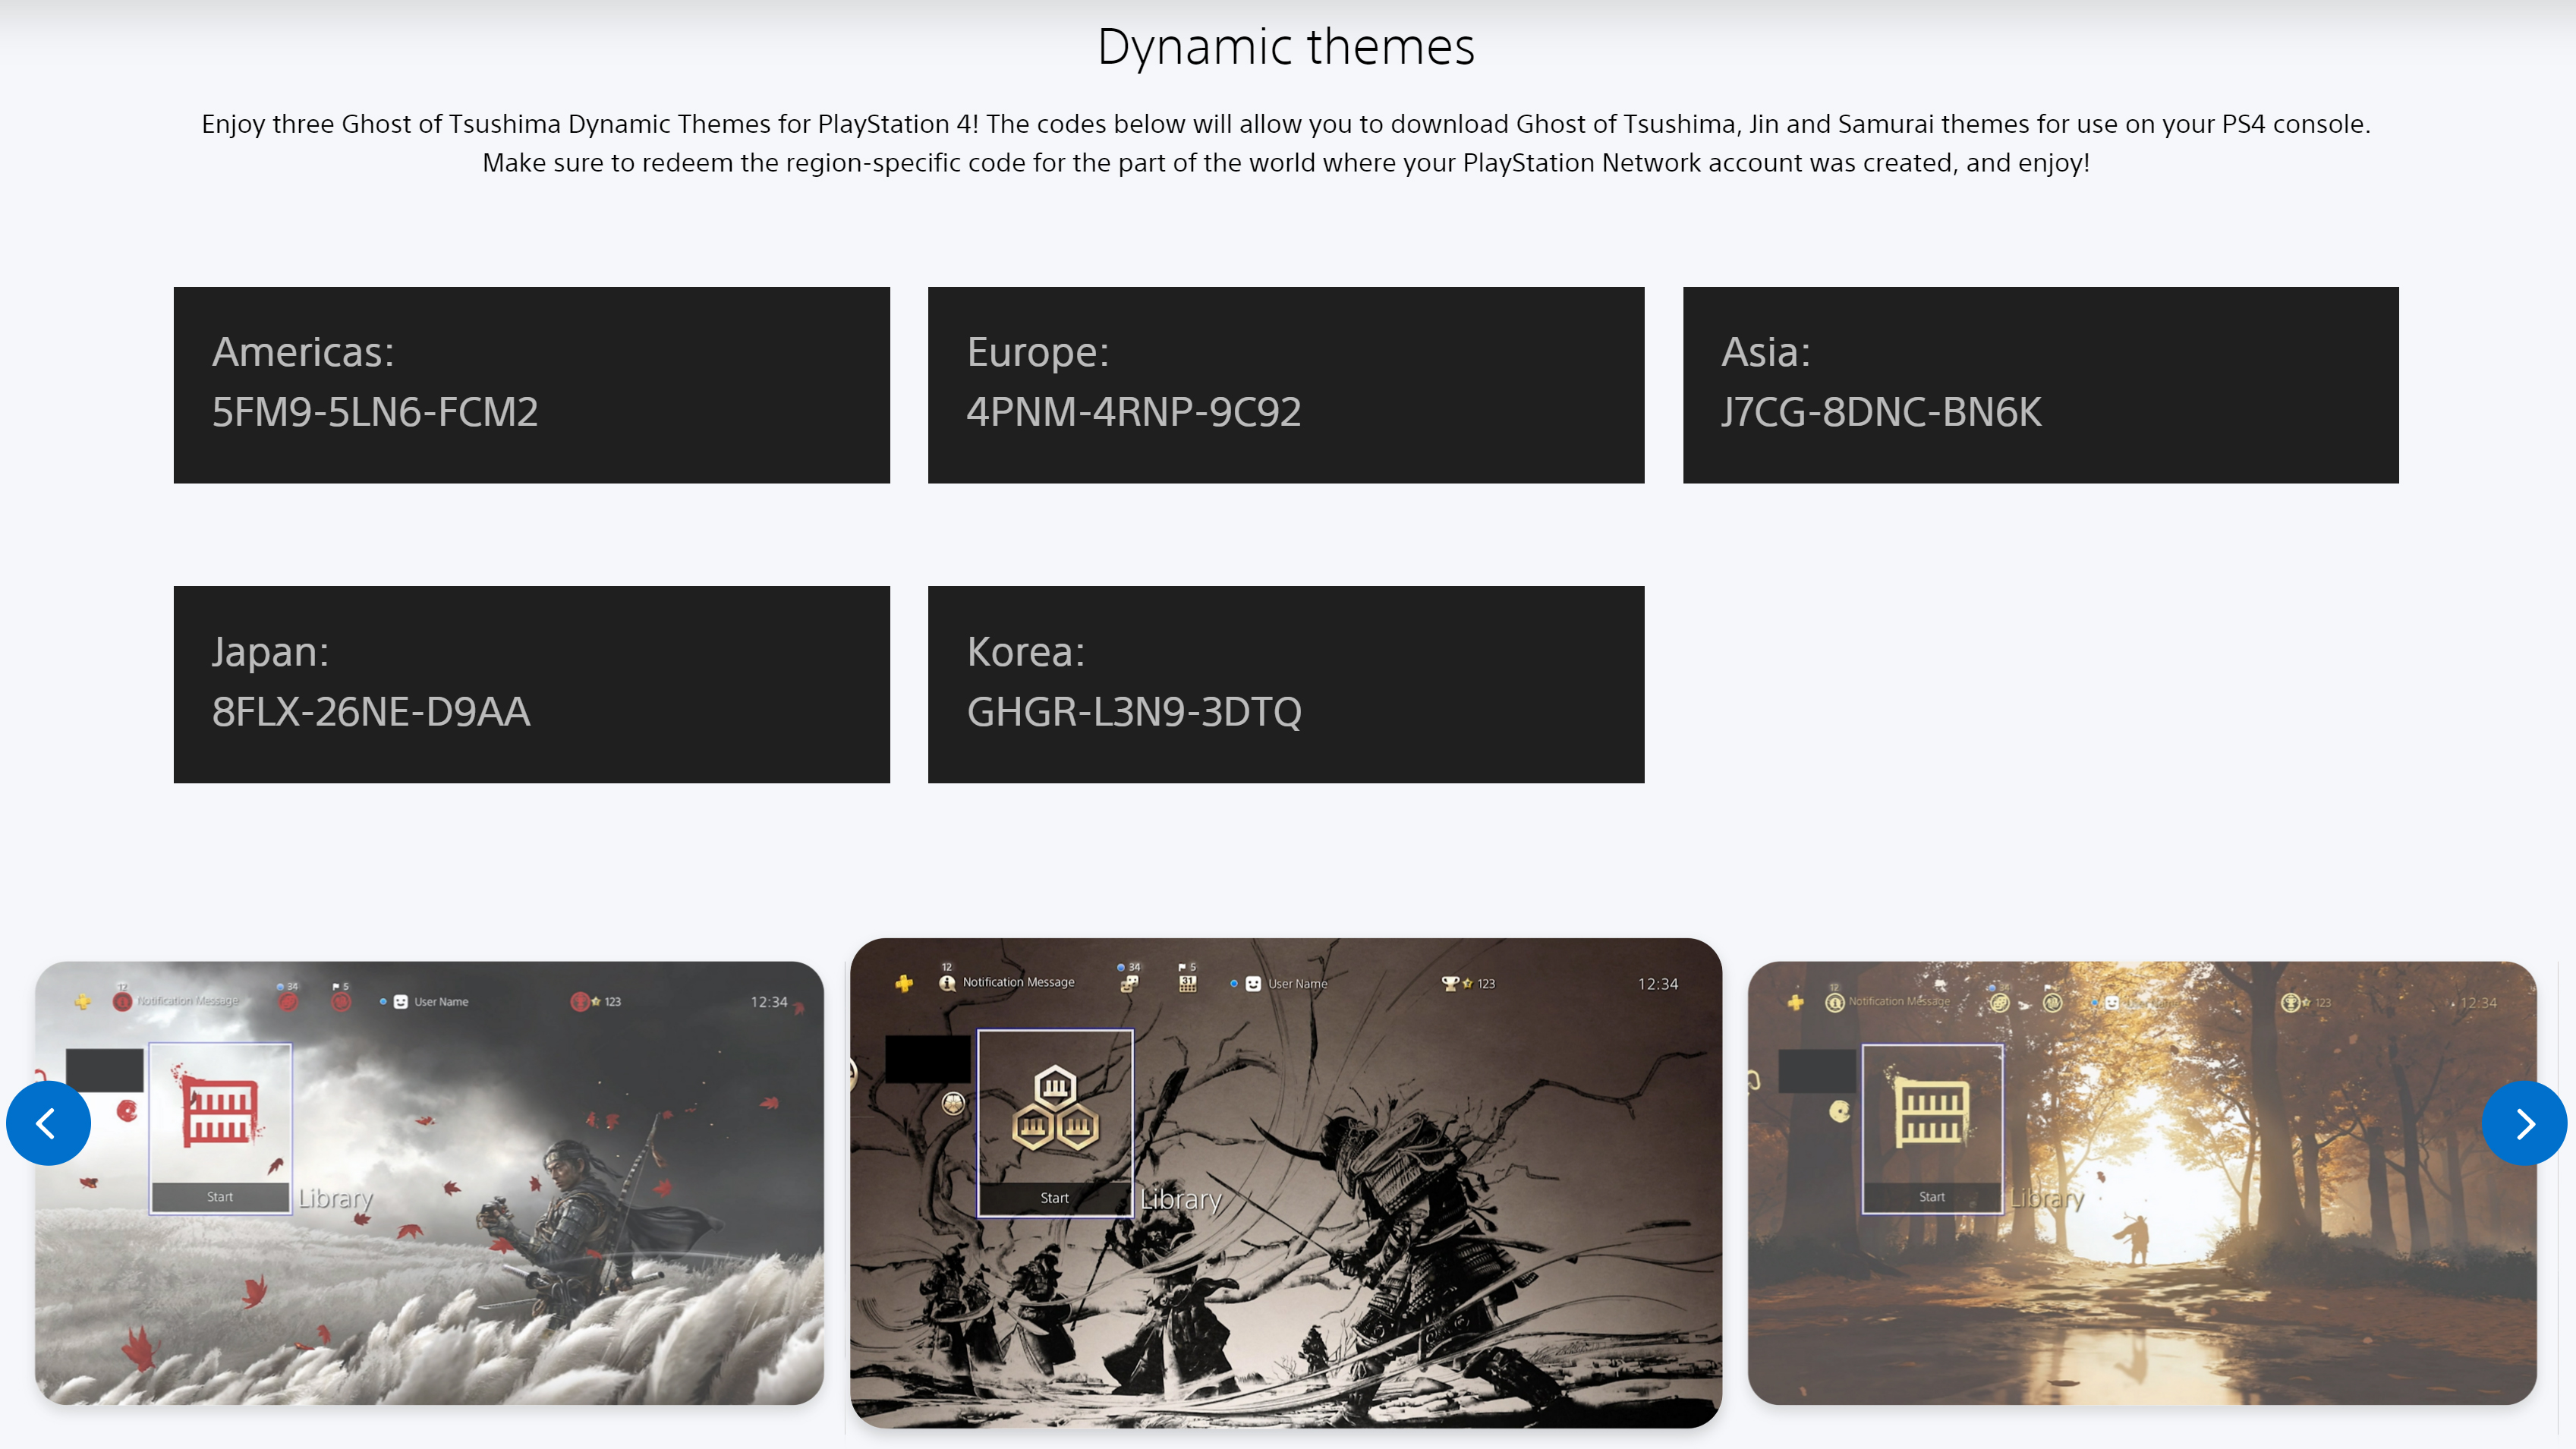 A screenshot from ghostoftsushima.com showing screenshots of three Dynamic Themes, with redemption codes for various regions above